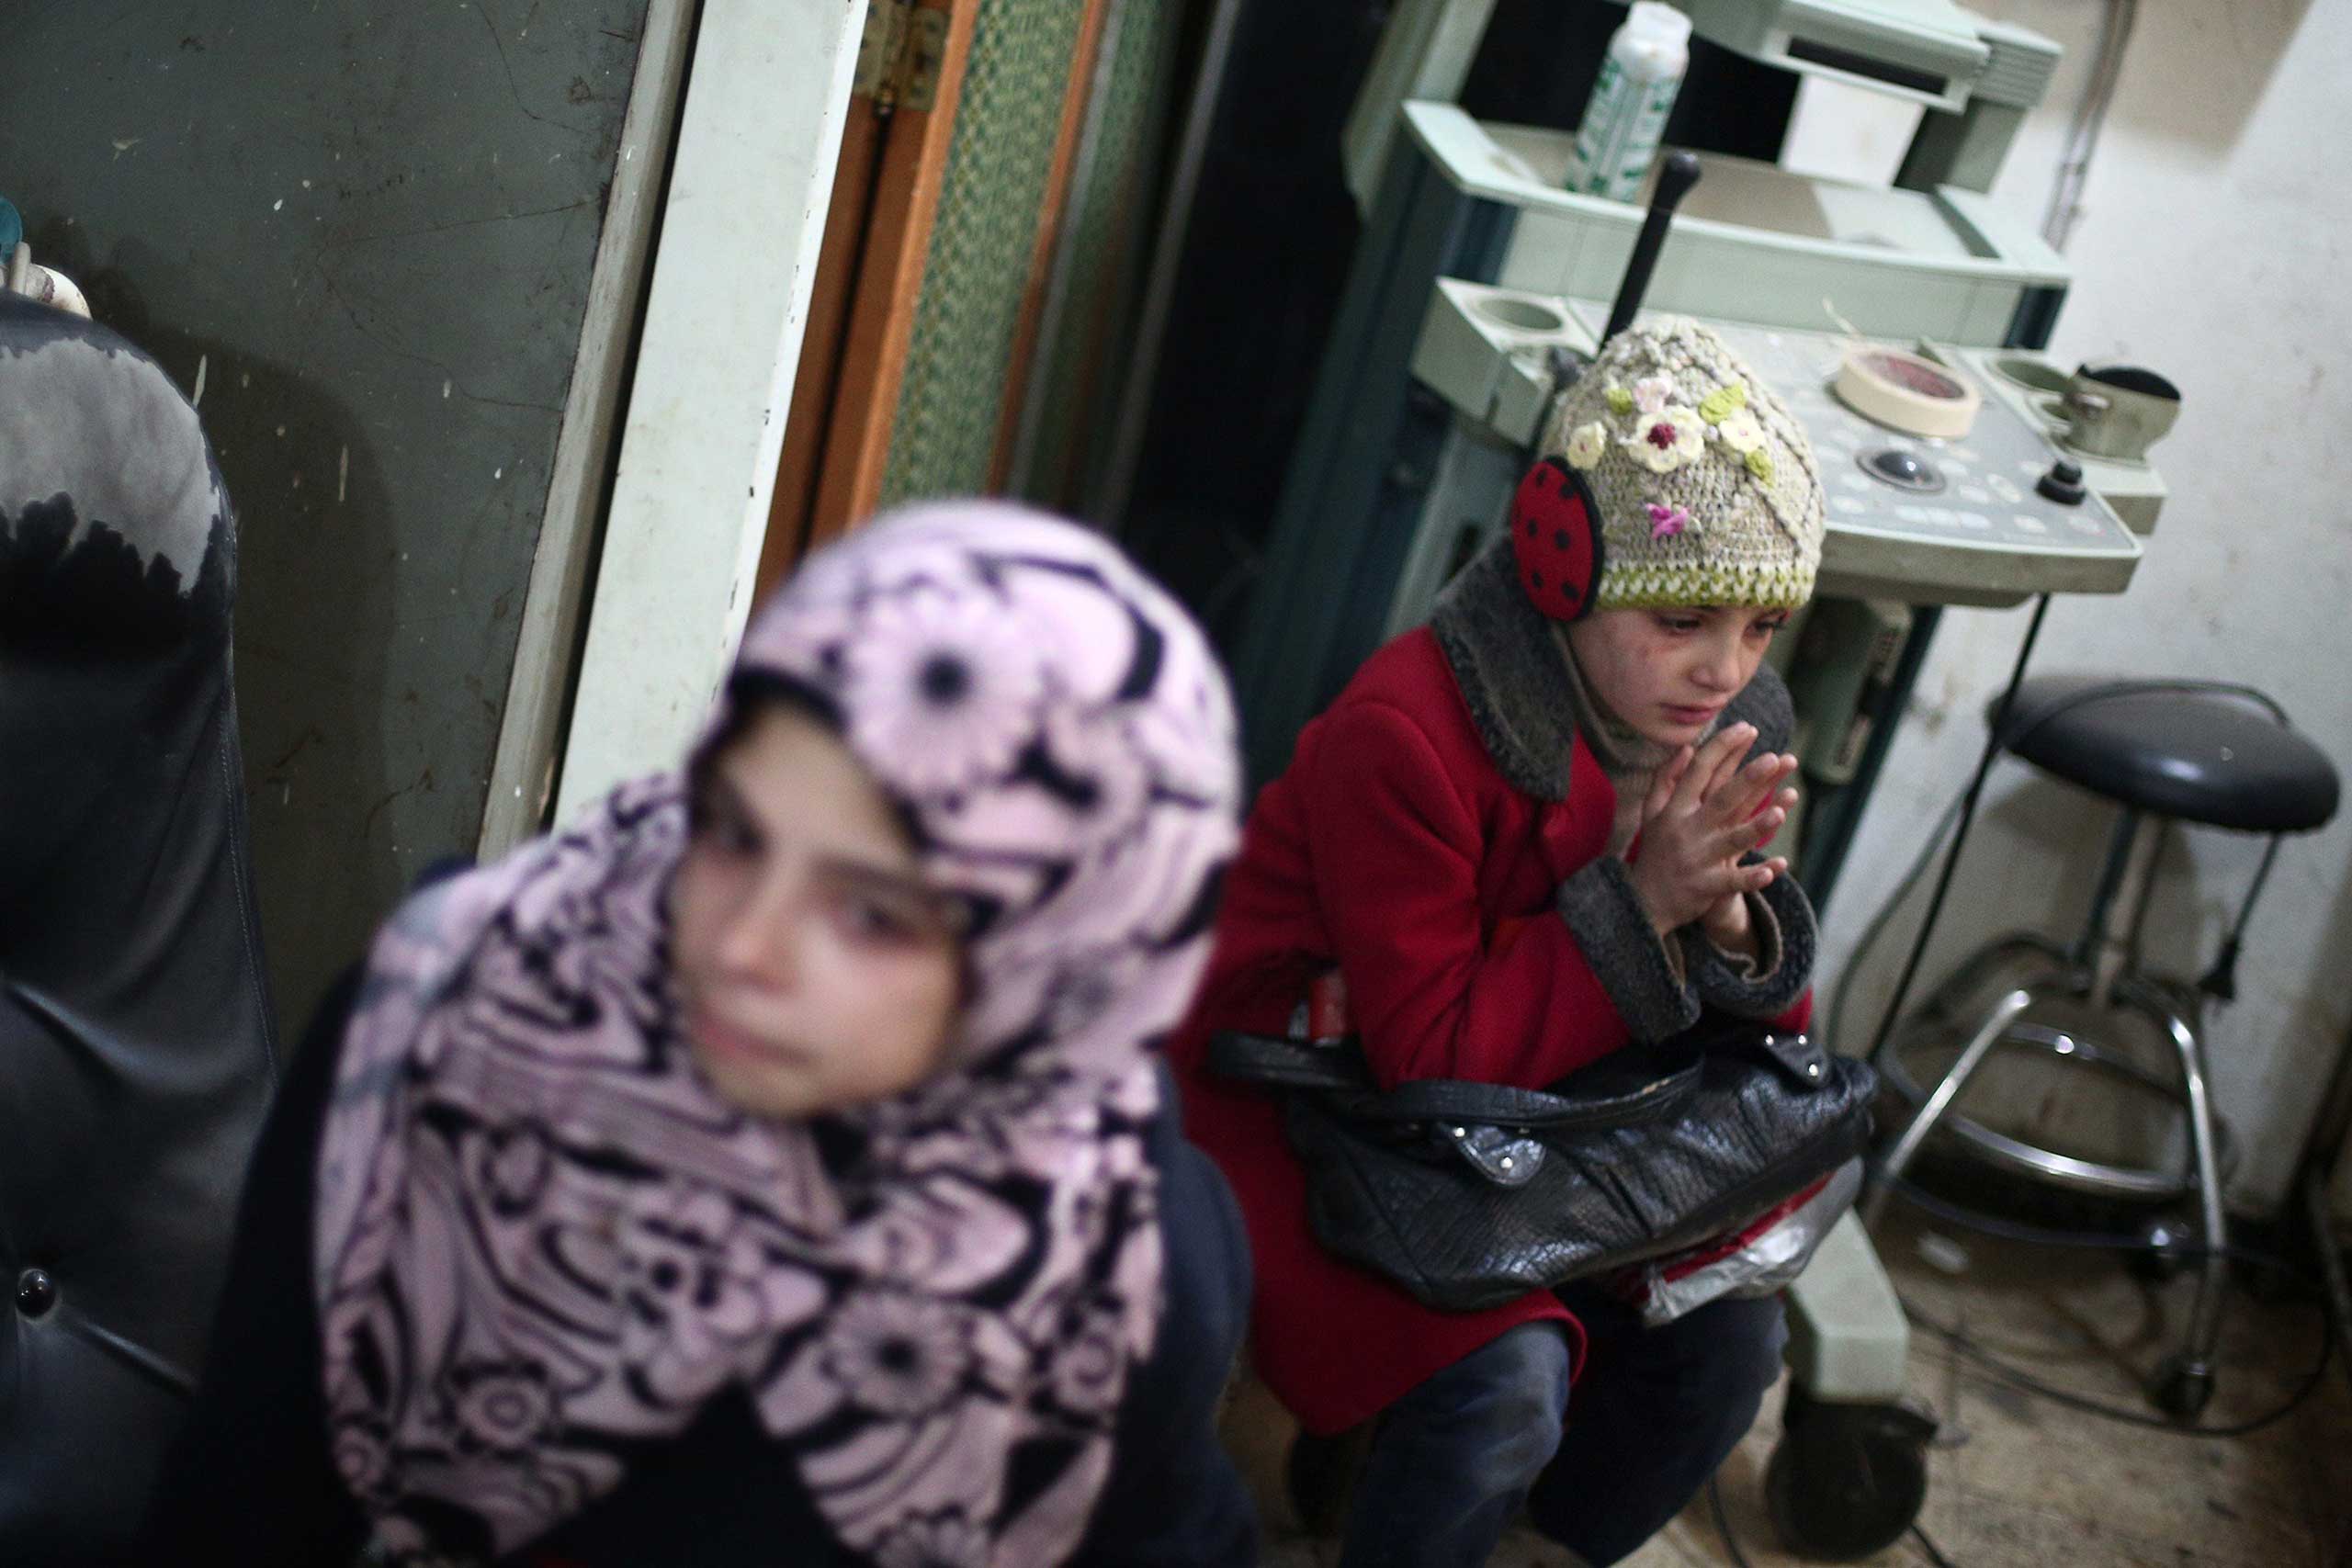 Feb. 9, 2015. Syrian girls react as they sit at a clinic in the rebel-held area of Douma, east of the capital Damascus, following reported air strikes by regime forces. Tens of thousand residents trapped in the rebel bastion suffer from food and medical shortages, as well as deadly regime bombardment.